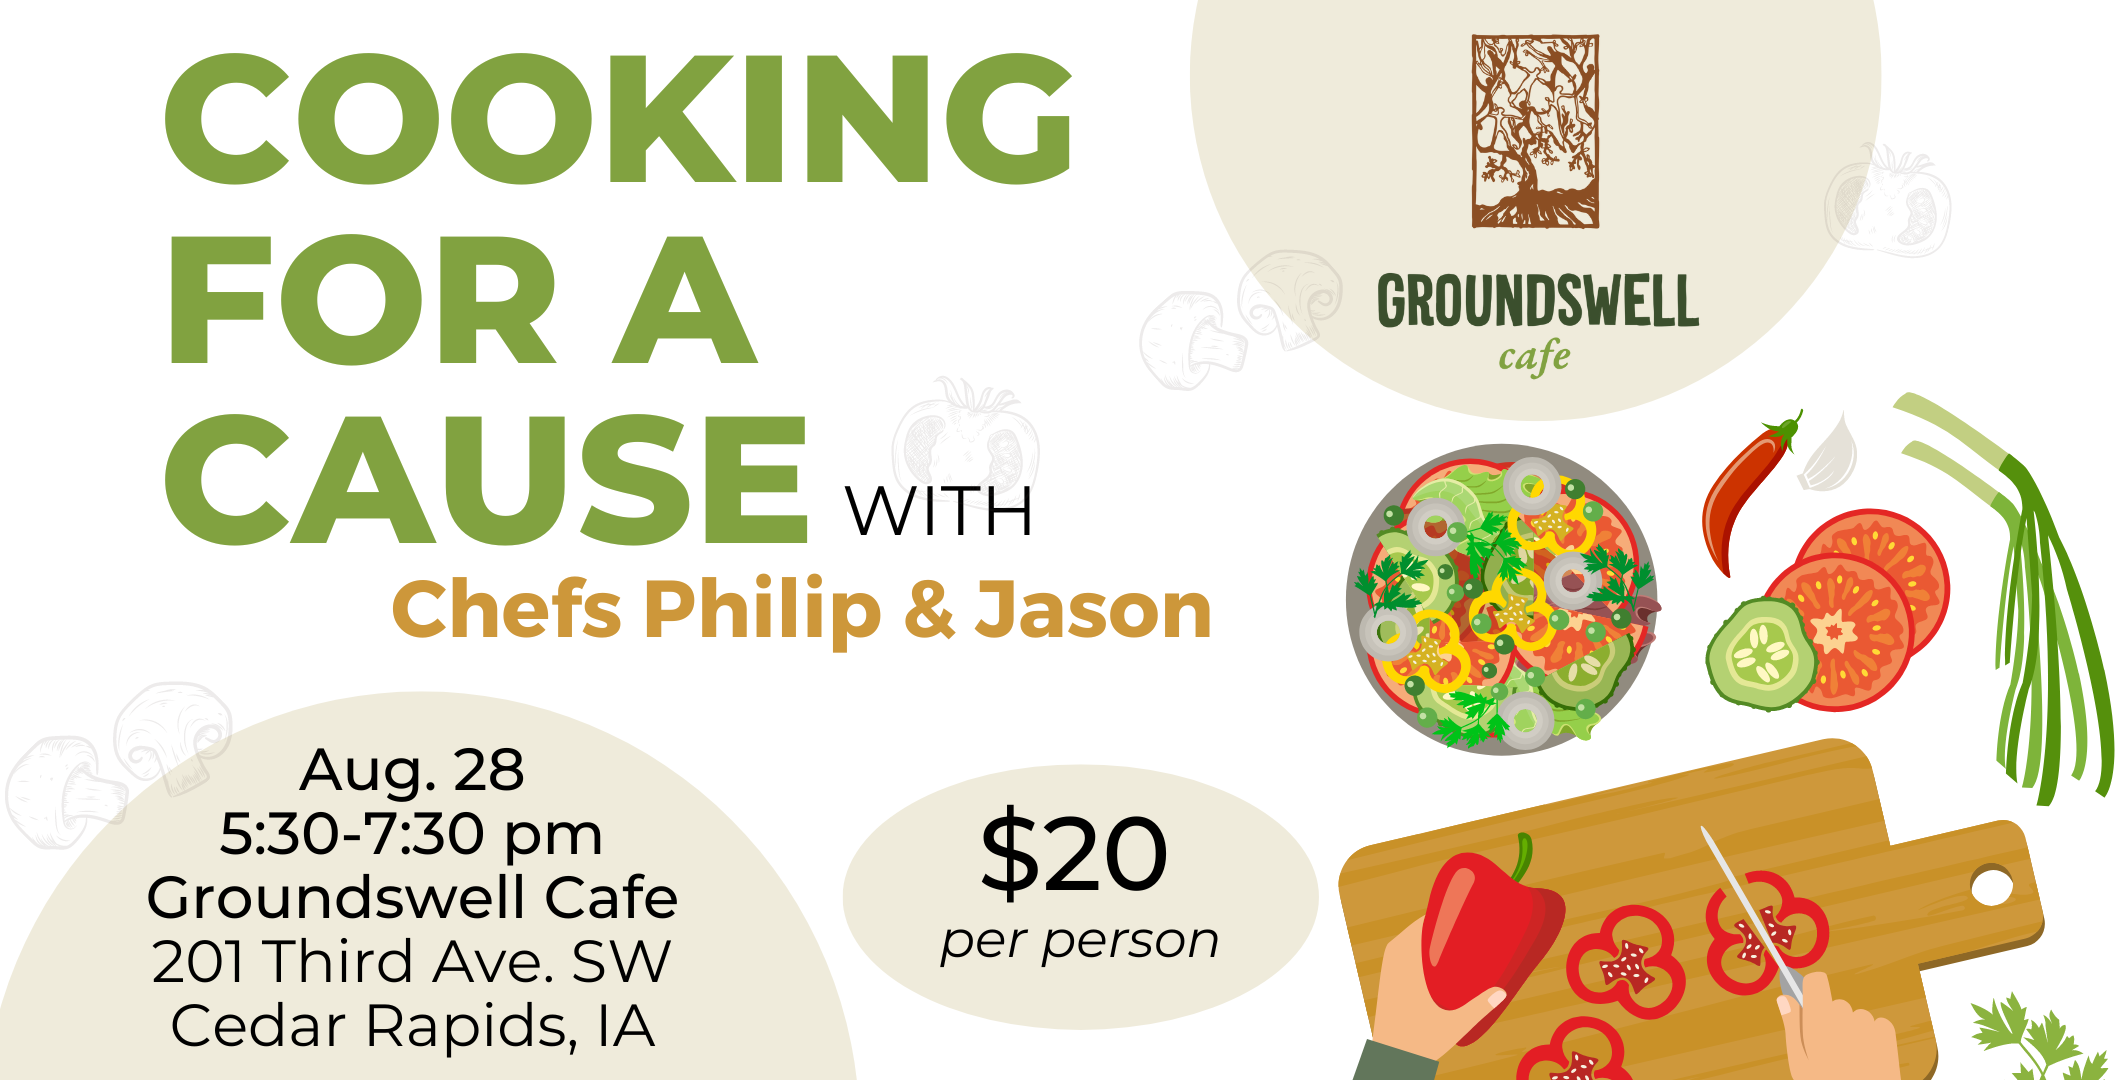 Cooking for a Cause – Aug. 28